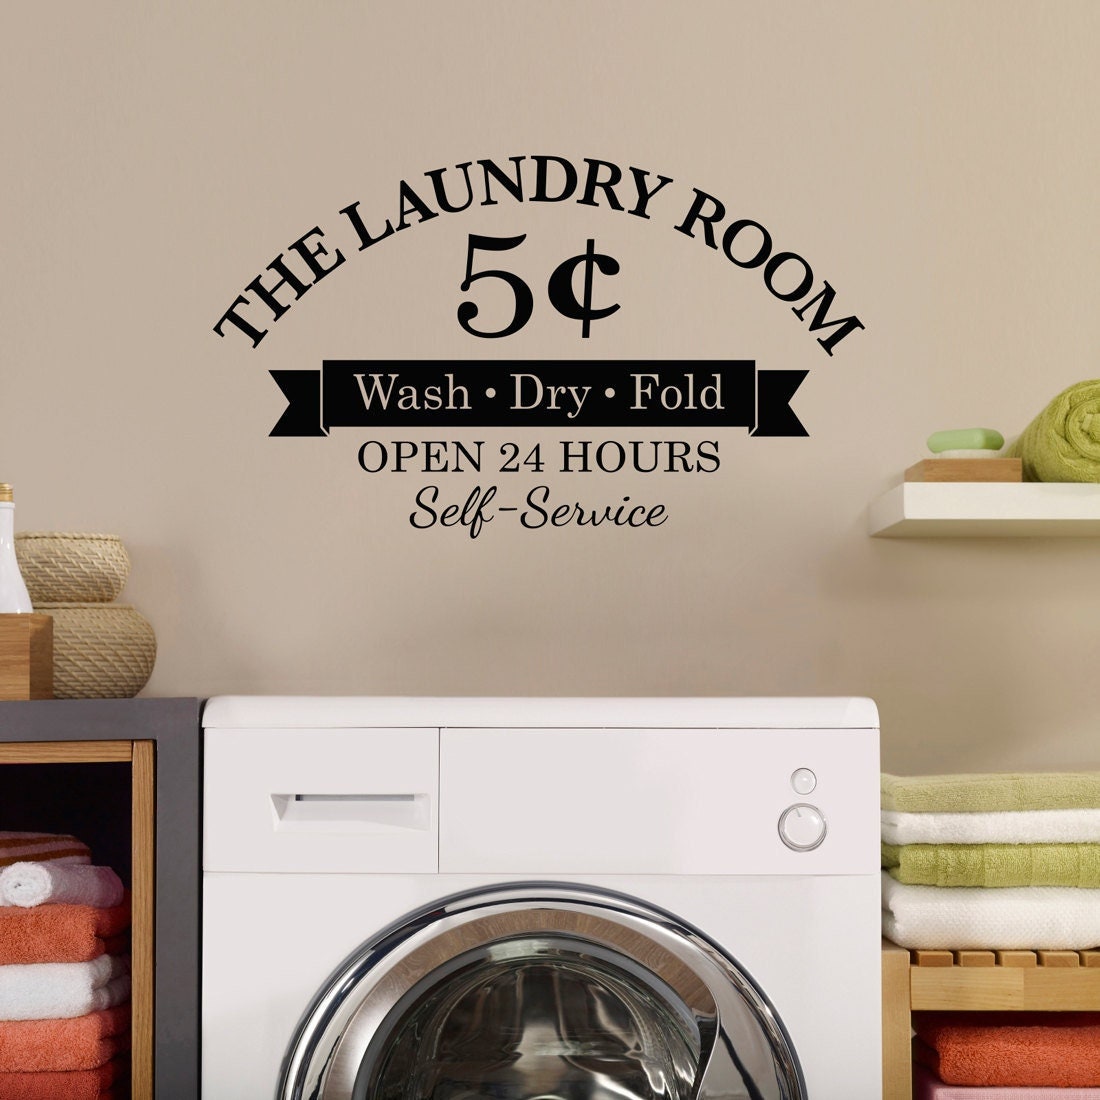 Laundry Room Decal | 5 Cents  Wash Dry Fold  Open 24 Hours | Self-Service | Laundry Room Vinyl Decor